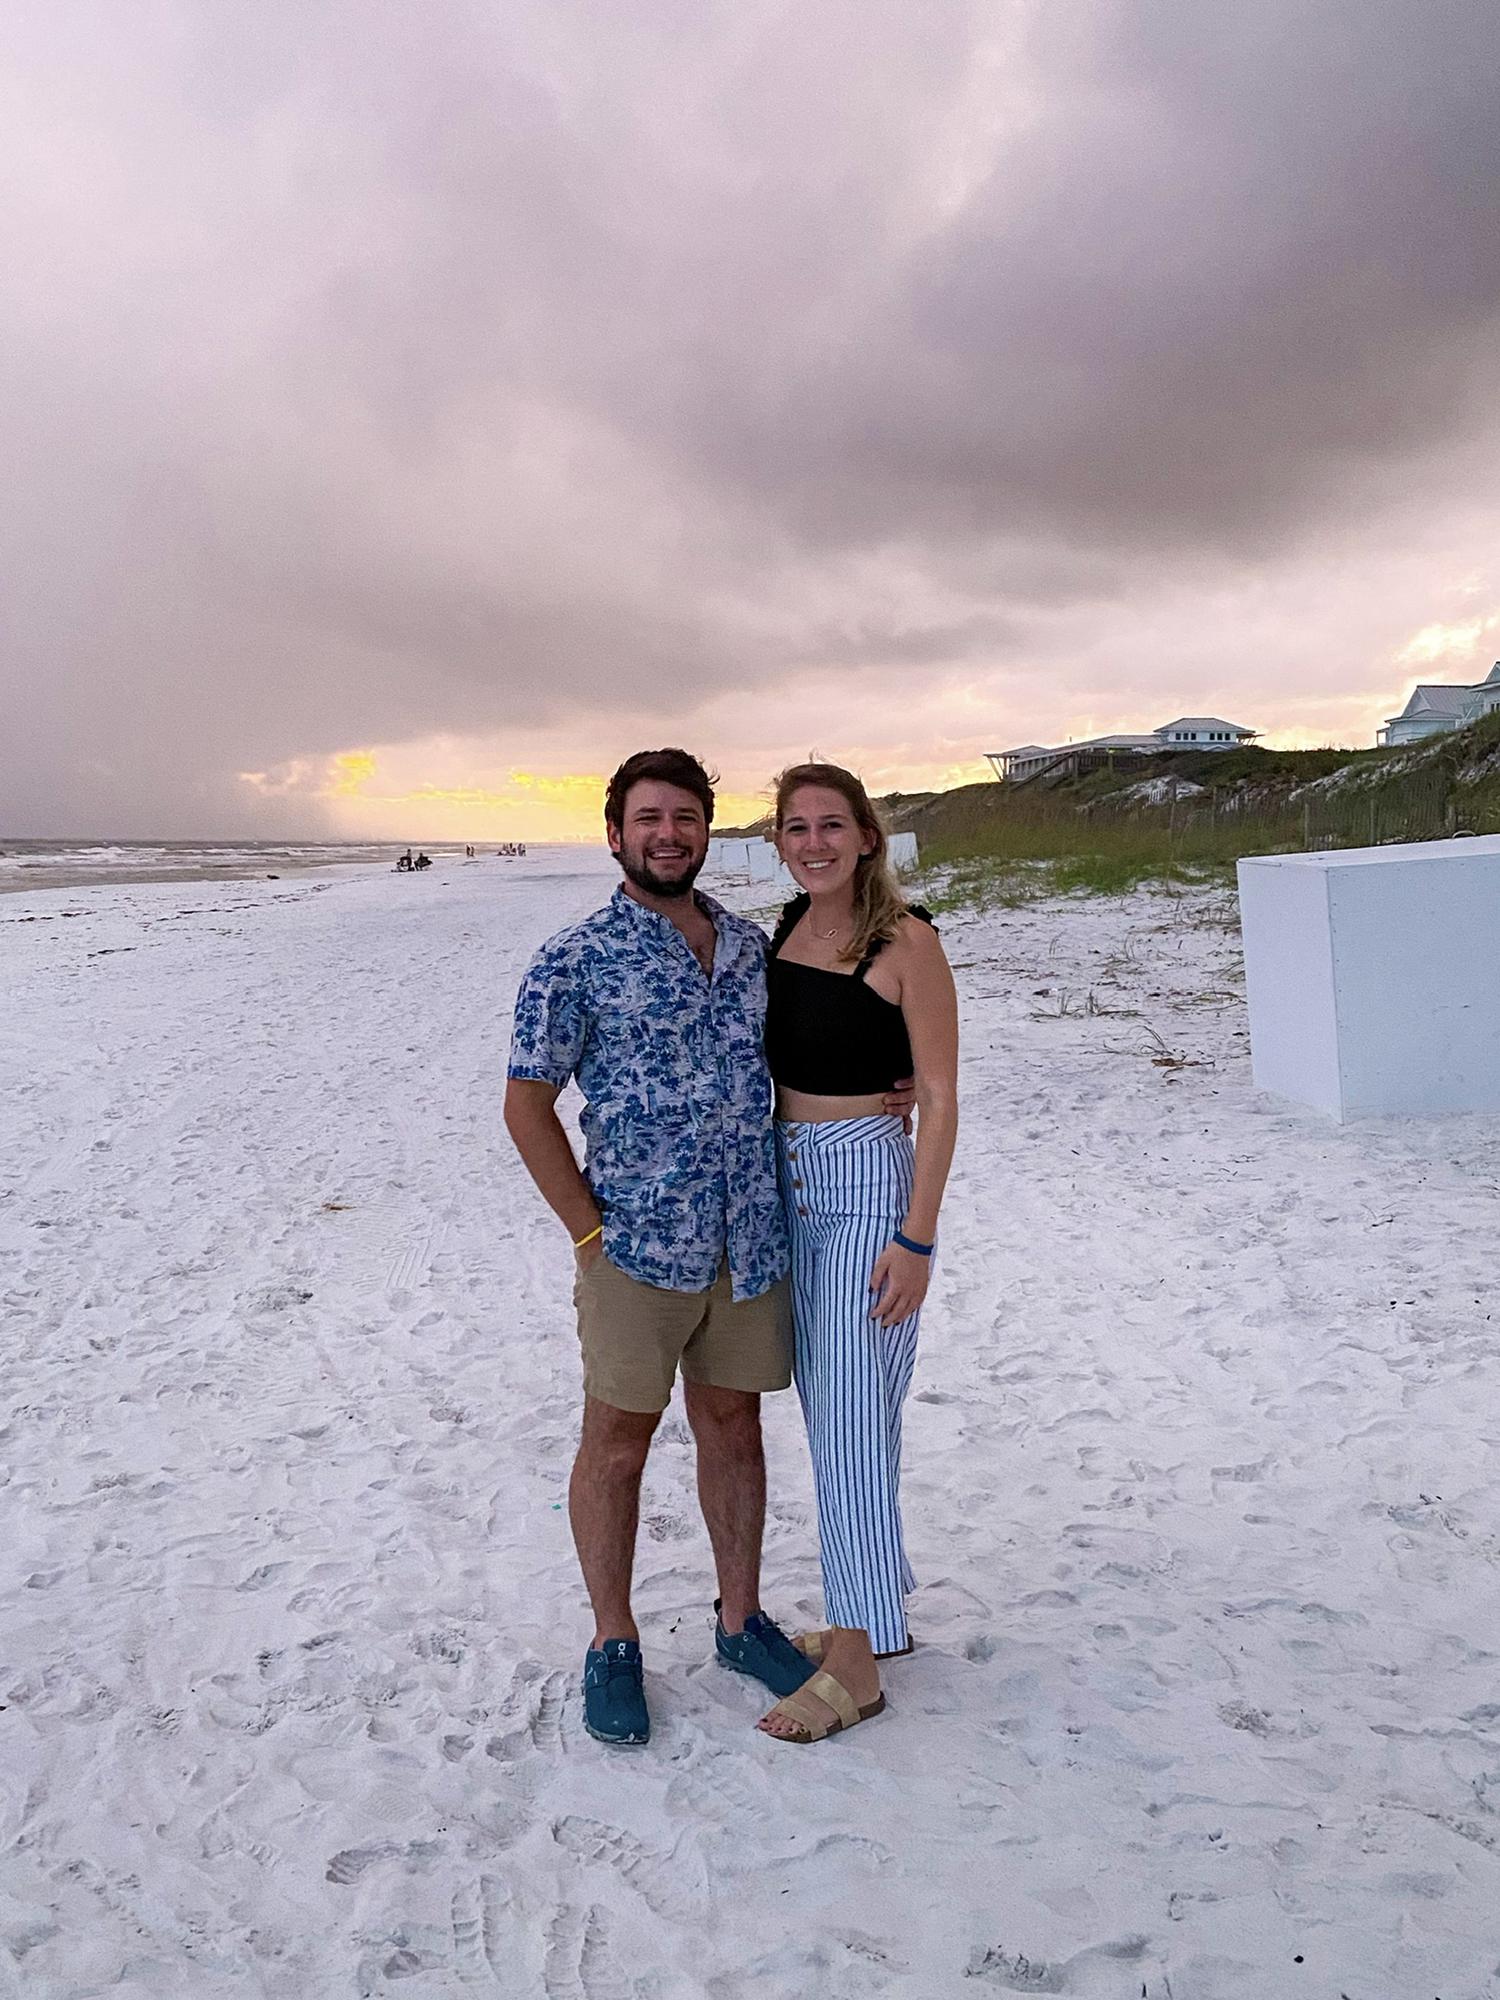 Our first trip together! Seaside, Florida. August 2020